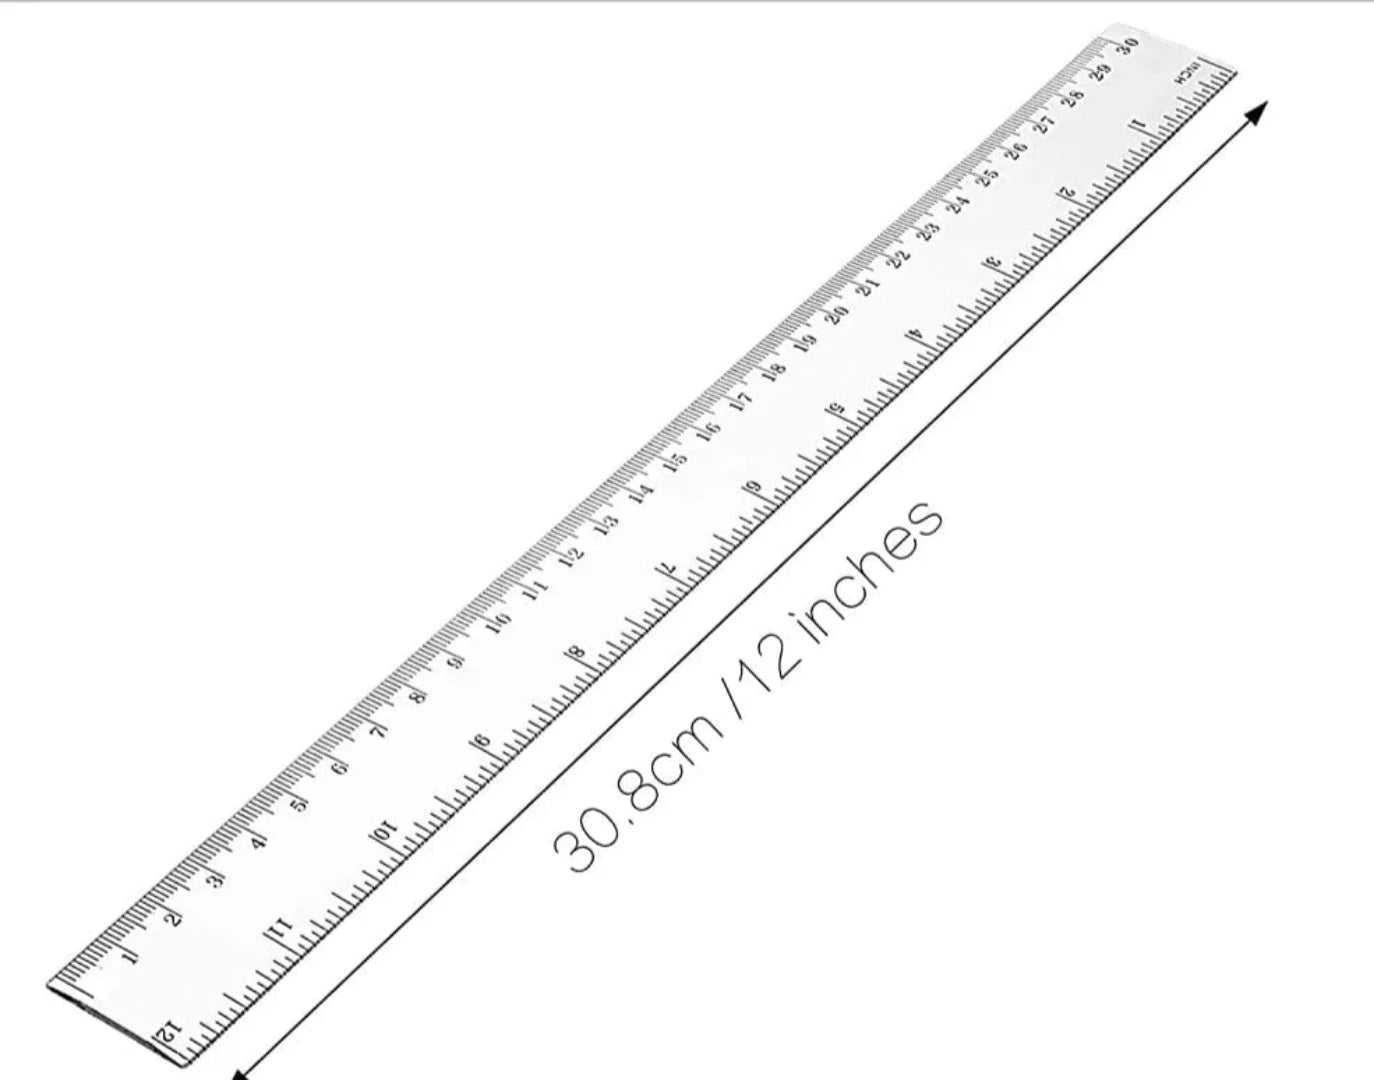 Generic: Plastic Ruler Scale 12inch/ 30cm at Rs 12.00